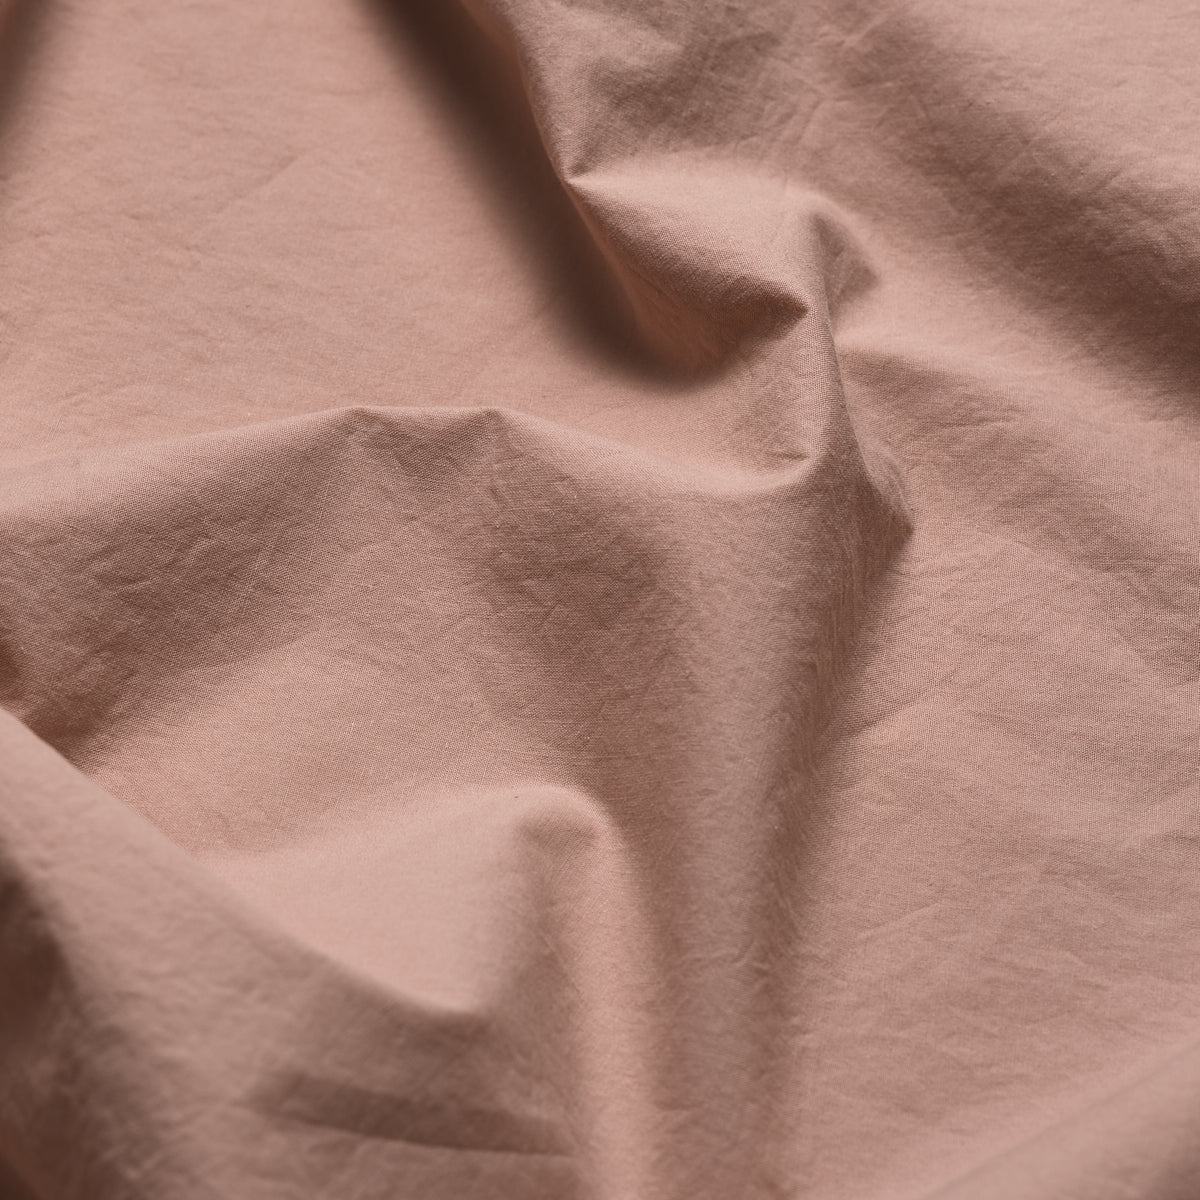 French Rose Washed Cotton Percale Flat Sheet